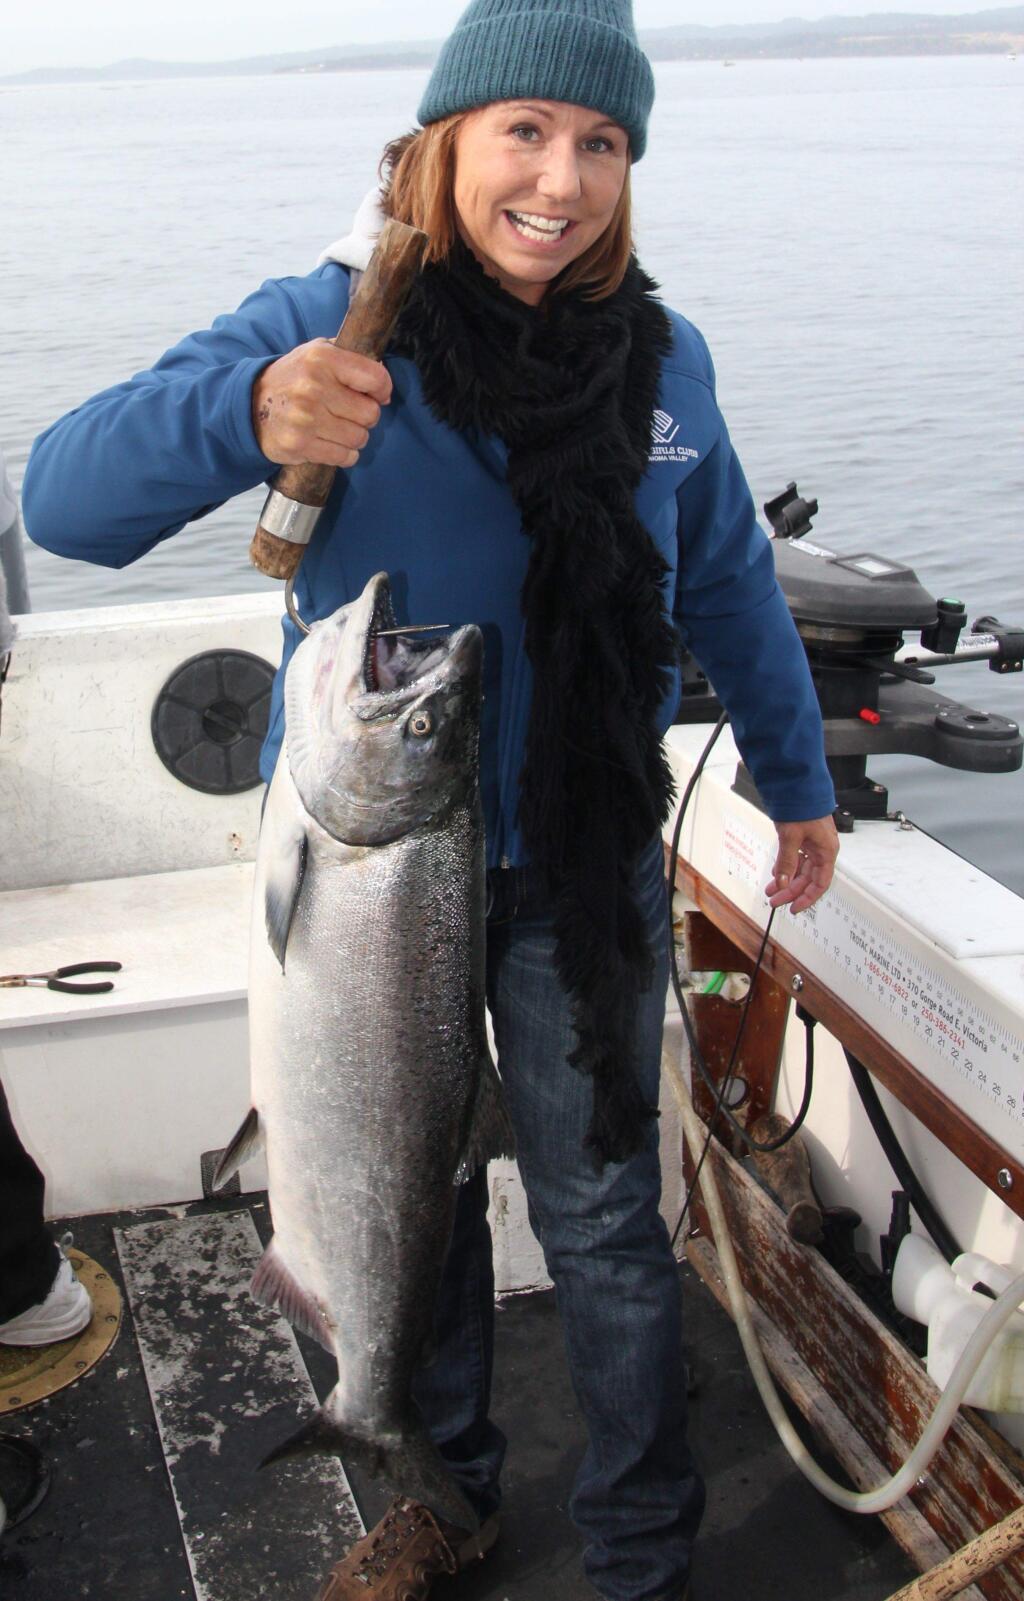 Submitted photo ERIN DOWNING finally sent me proof that she really did out-fish her husband Dale last month in the straights between Vancouver Island and mainland British Columbia.  She looks like a veteran fisherwoman holding this monster king salmon, one of several she caught up there.